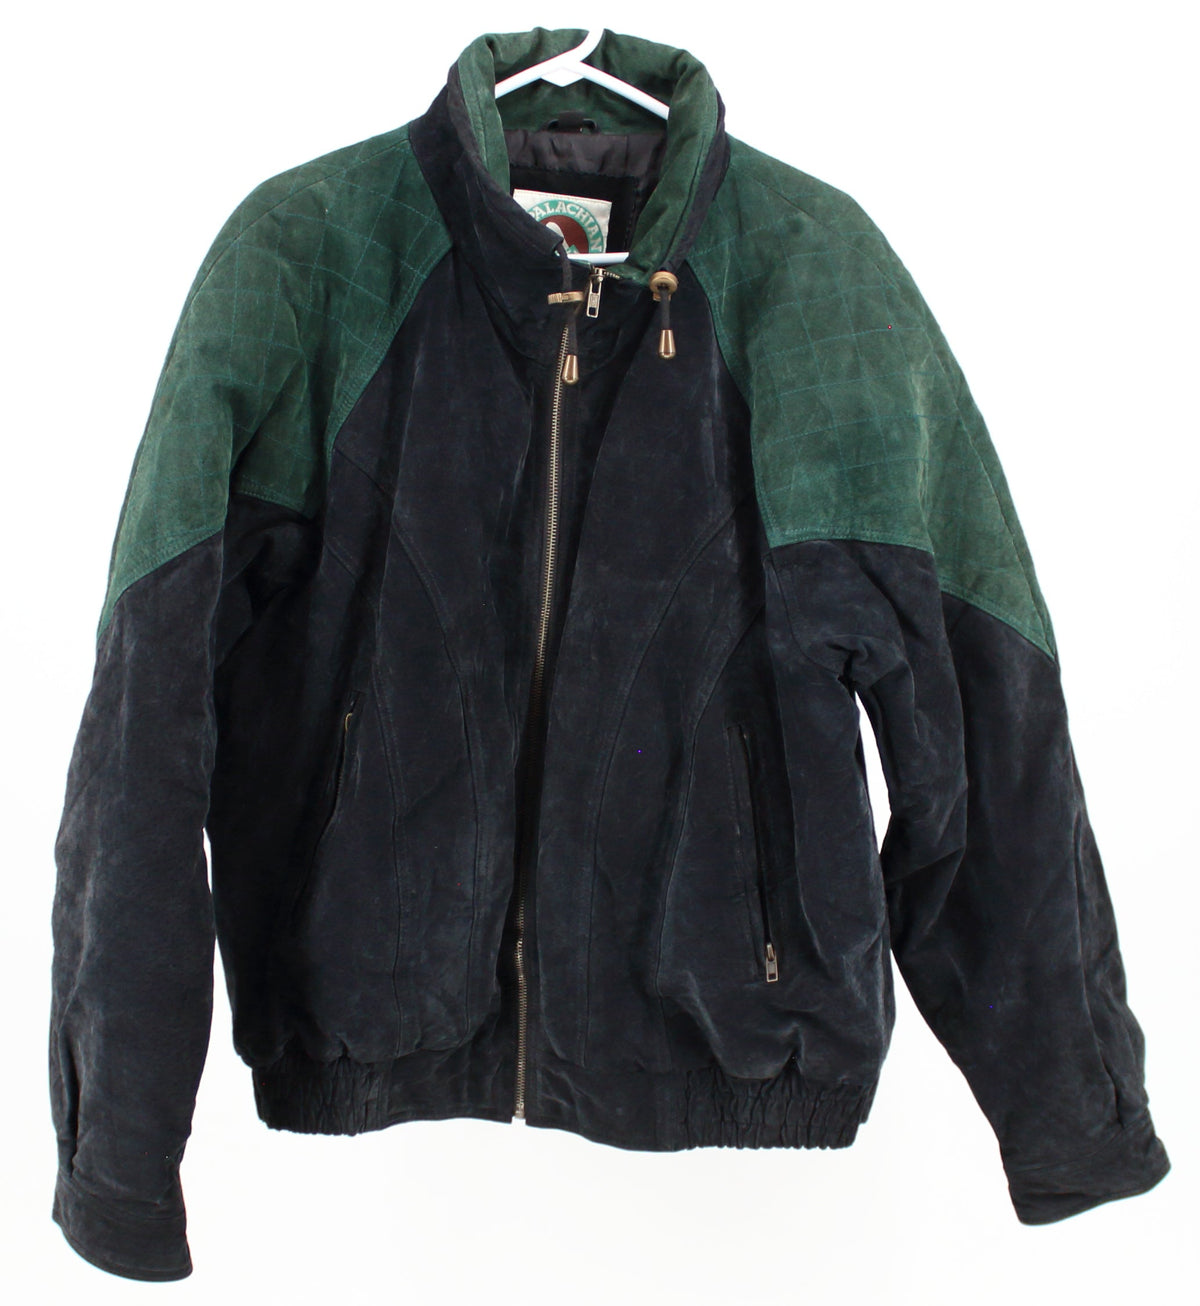 Appalachian Trail Black and Green Suede Bomber Jacket